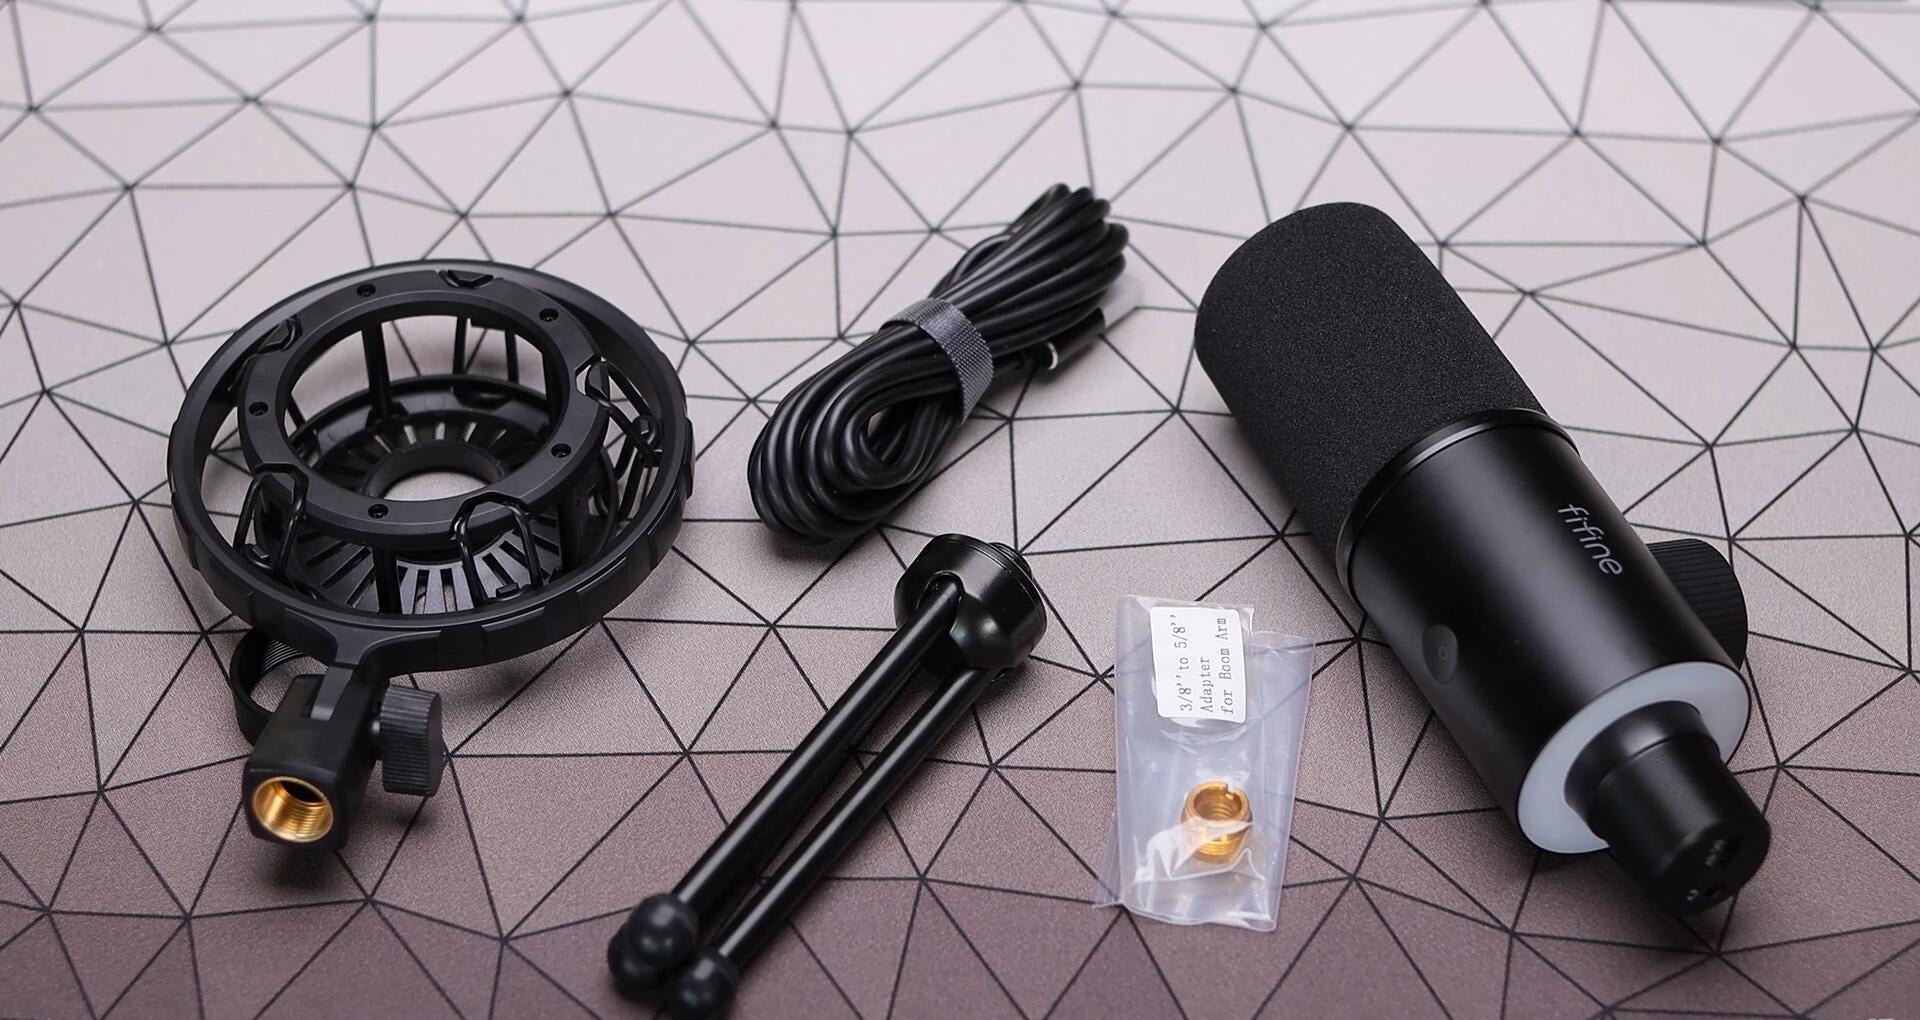 FIFINE K658 USB Dynamic Cardioid Microphone Review @FIFINEMIC